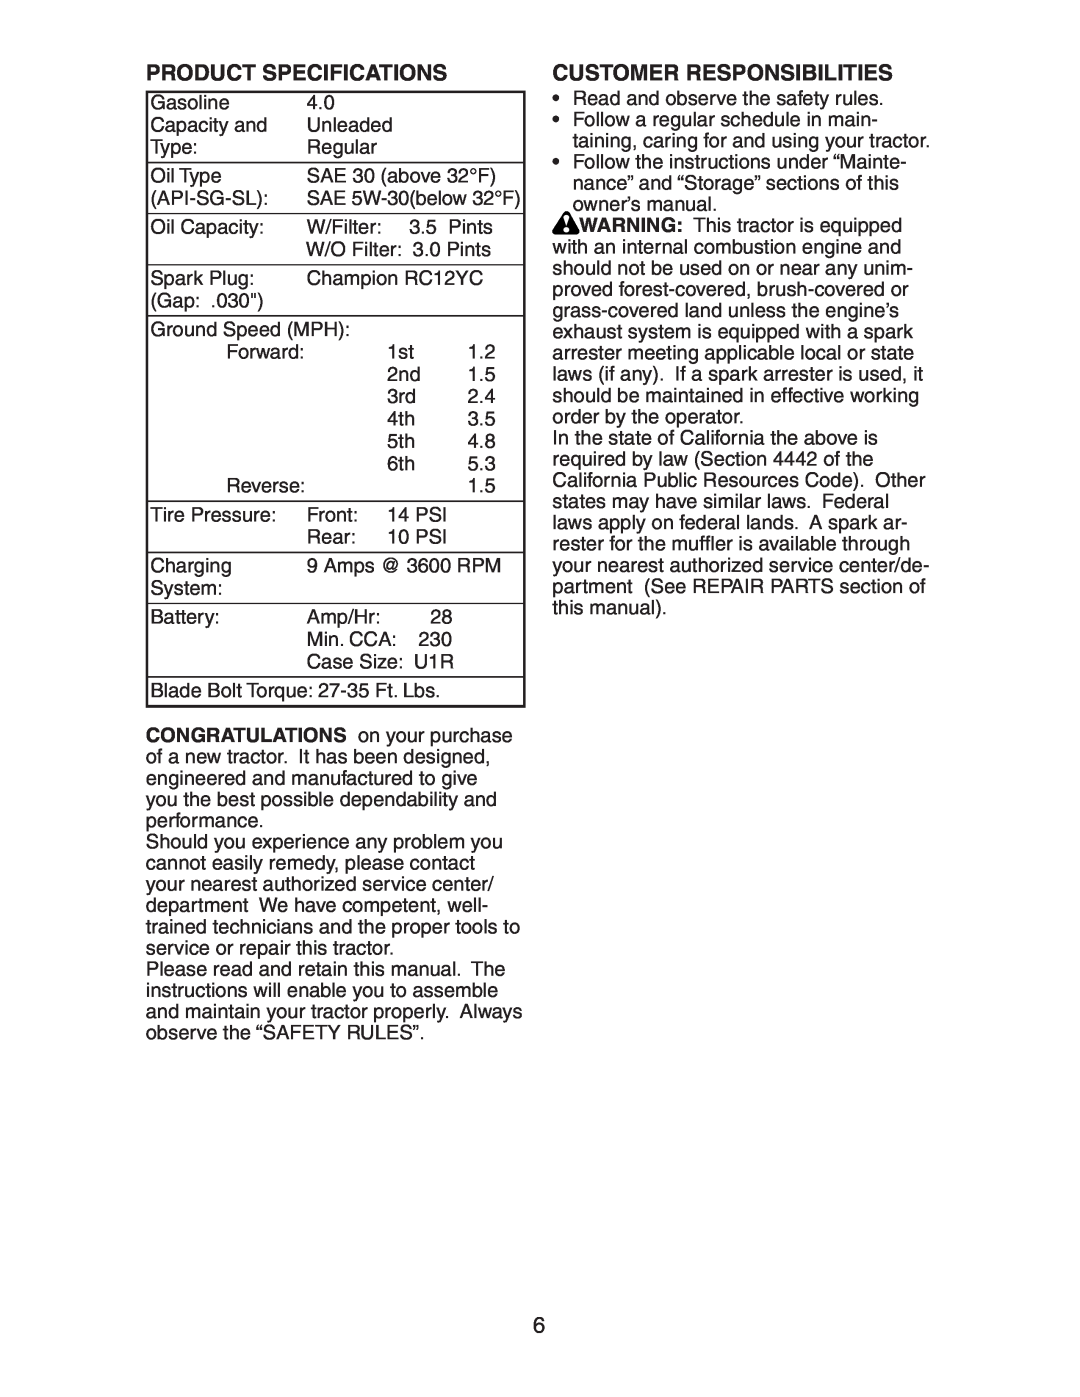 Poulan CO18542STB manual Product Specifications, Customer Responsibilities 